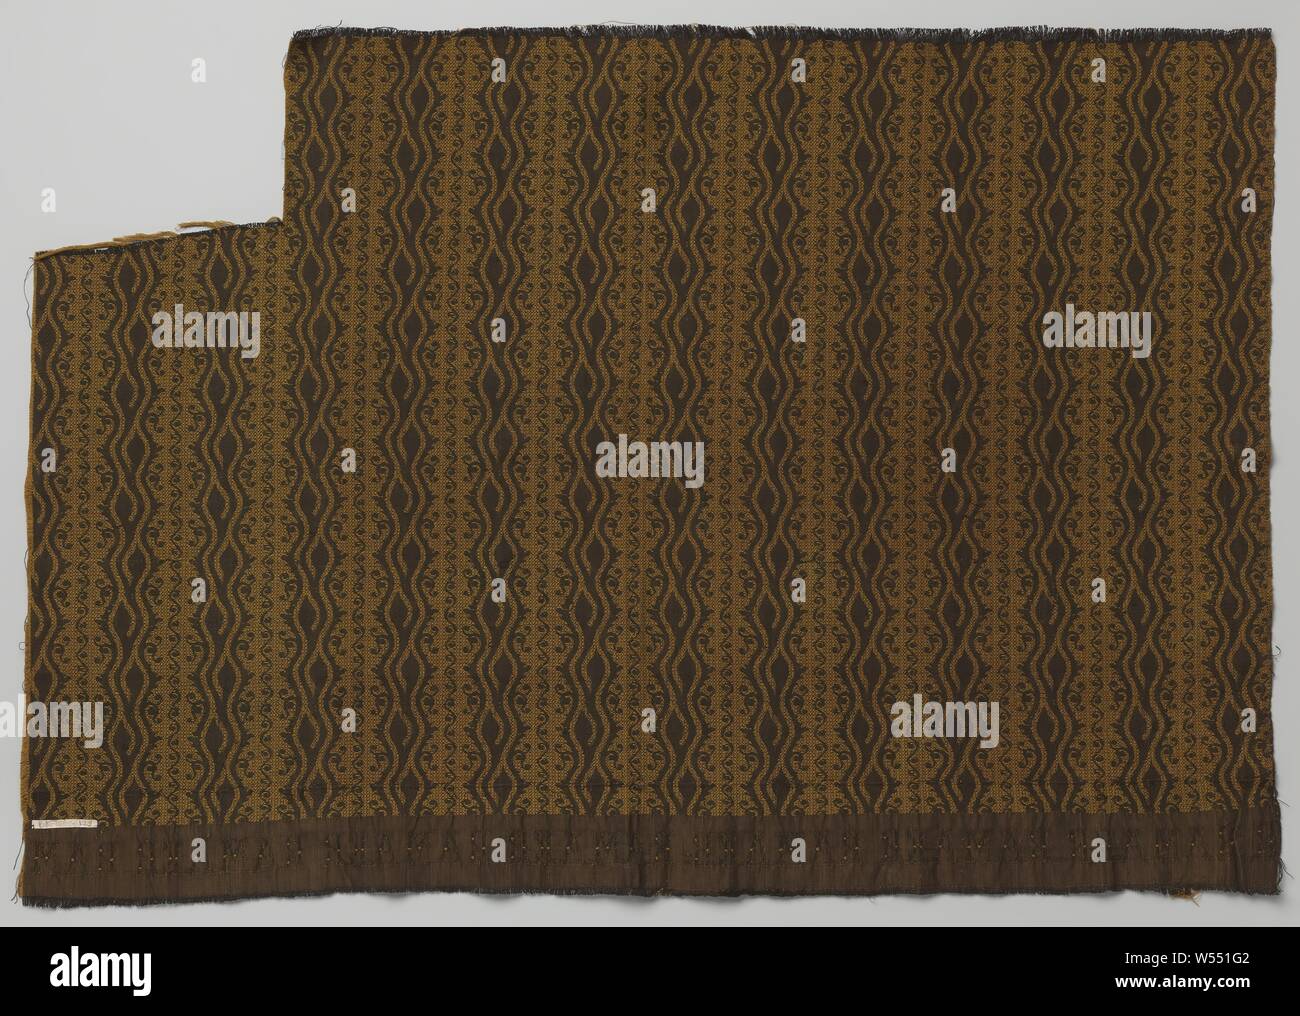 Curtain fabric with ornamented longitudinal stripes, Curtain fabric with ornamented longitudinal stripes. Bottom border with RAMAER weaving. Yellow impact on black chain. Top right part of 17 x 17 cm. cut out., W.G.J. Ramaer & Co., Netherlands, 1900 - 1925, cotton (textile), h 57.0 cm × w 84.0 cm Stock Photo